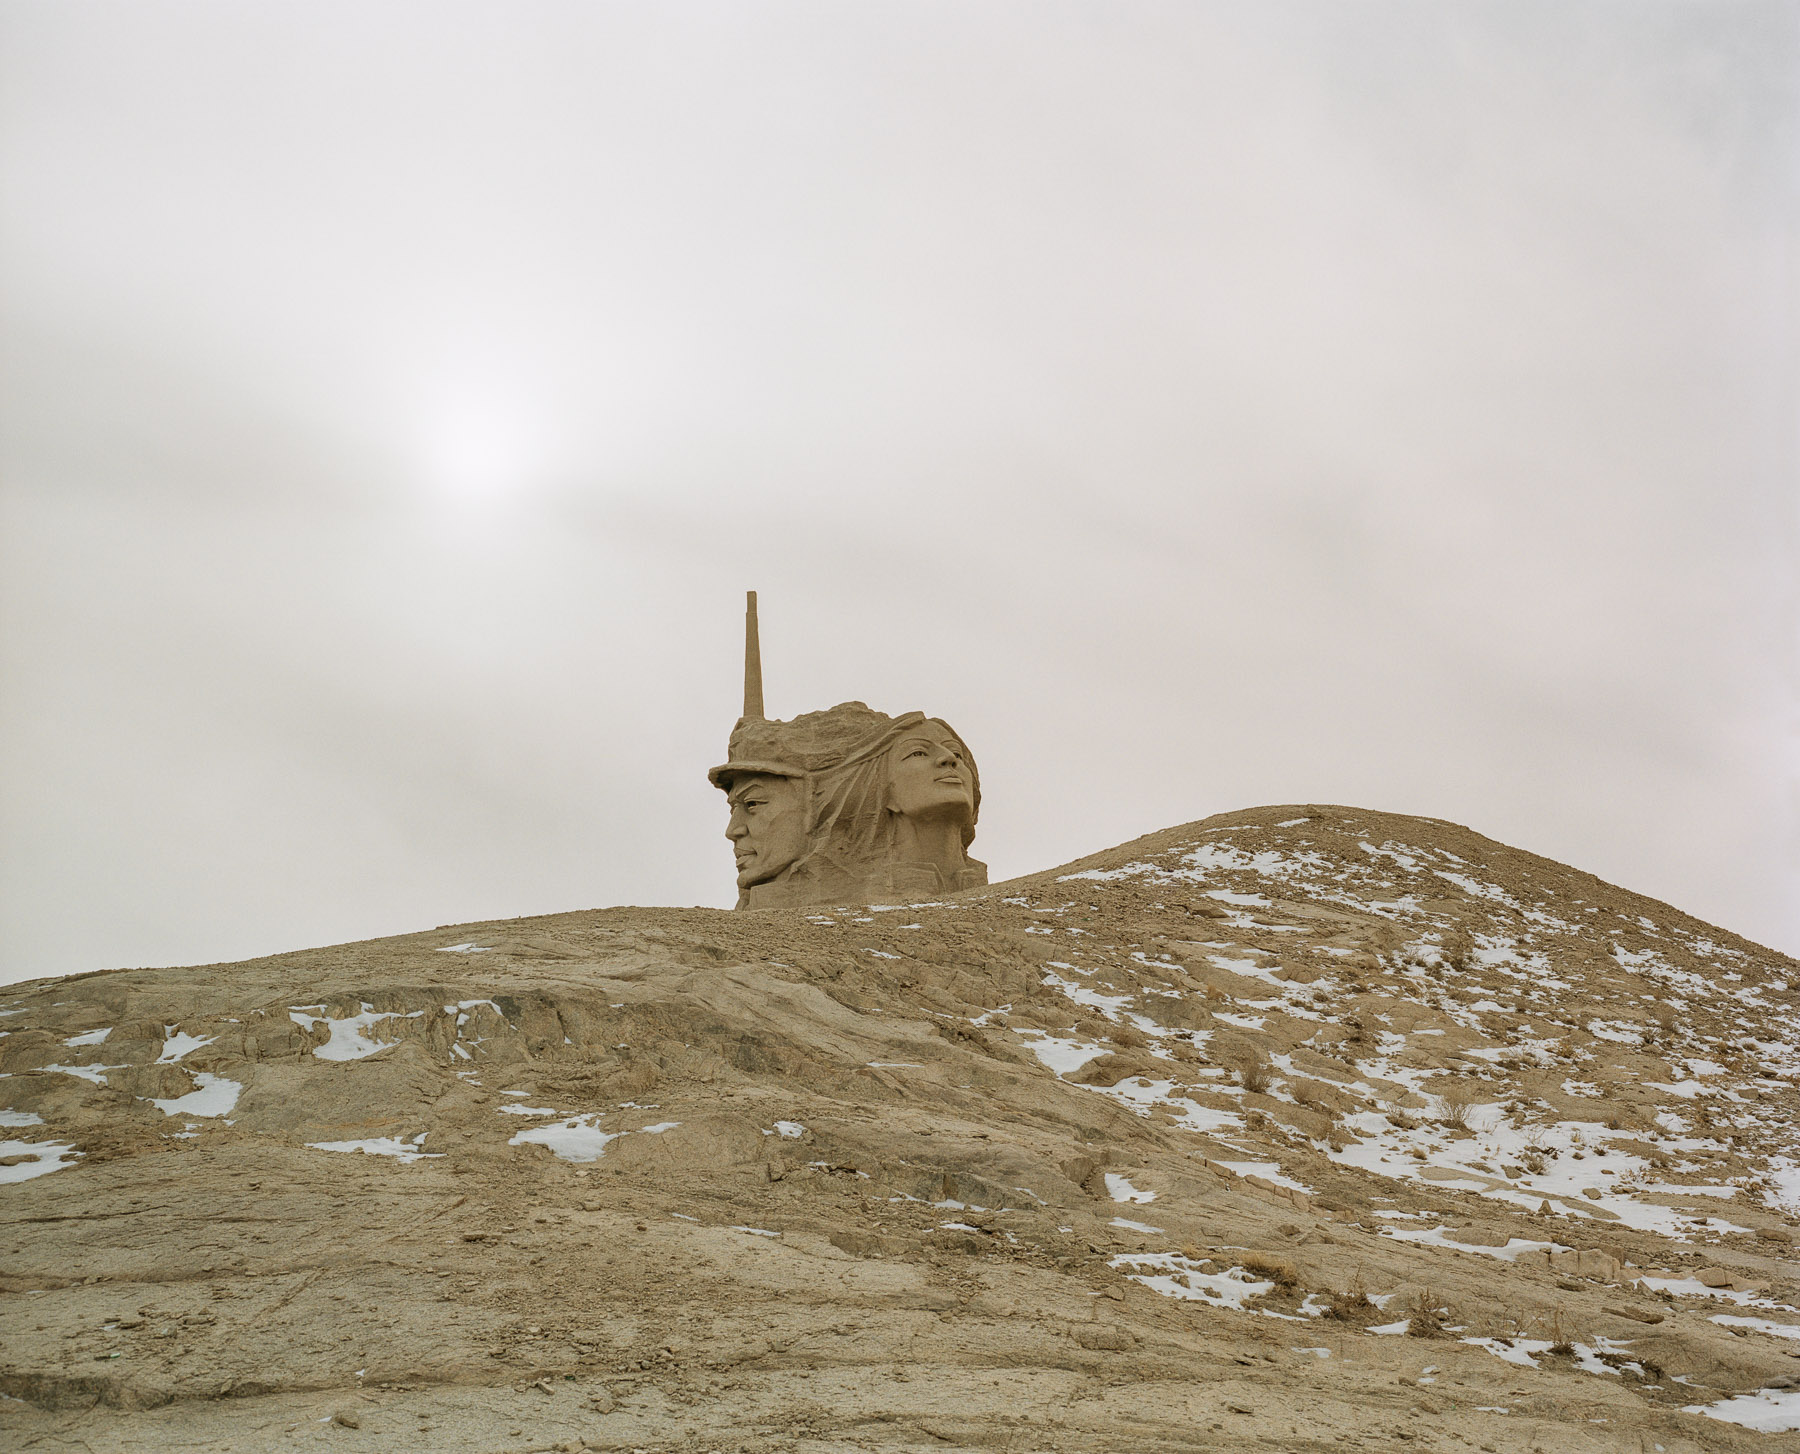  December 2016. Xinjiang province, China. Communist monument in Xinjiang on the road G312 to Hami (also called Kumul) driving from Gansu province.  